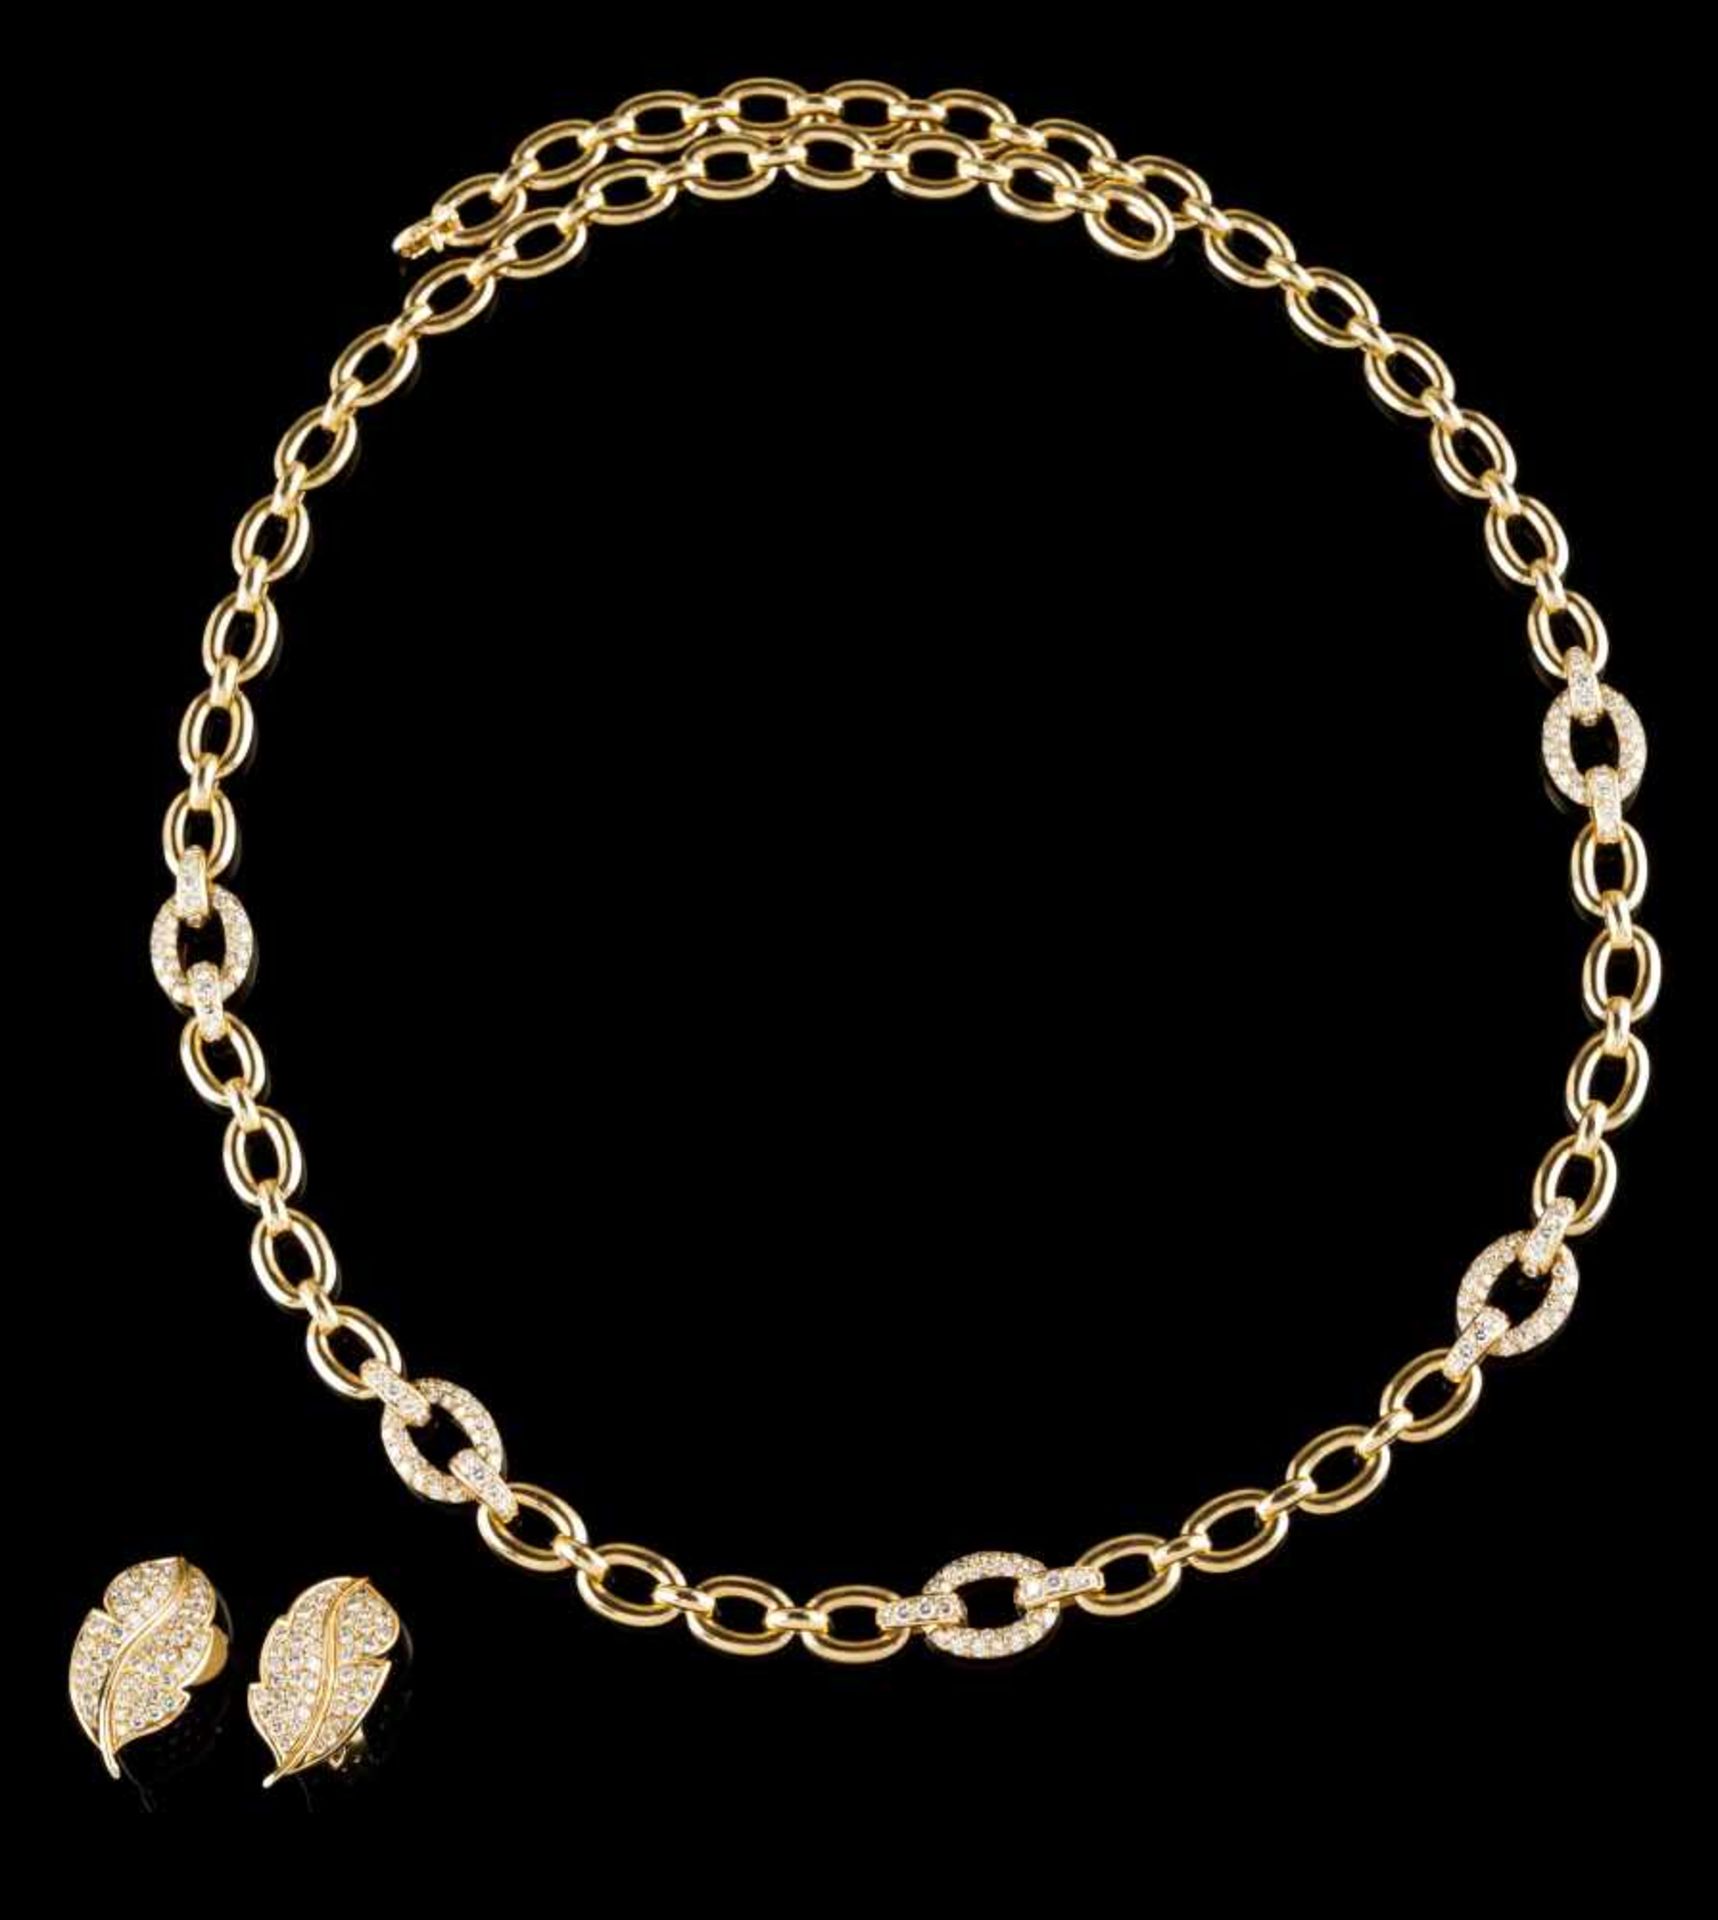 A Van Cleef and Arpels necklace